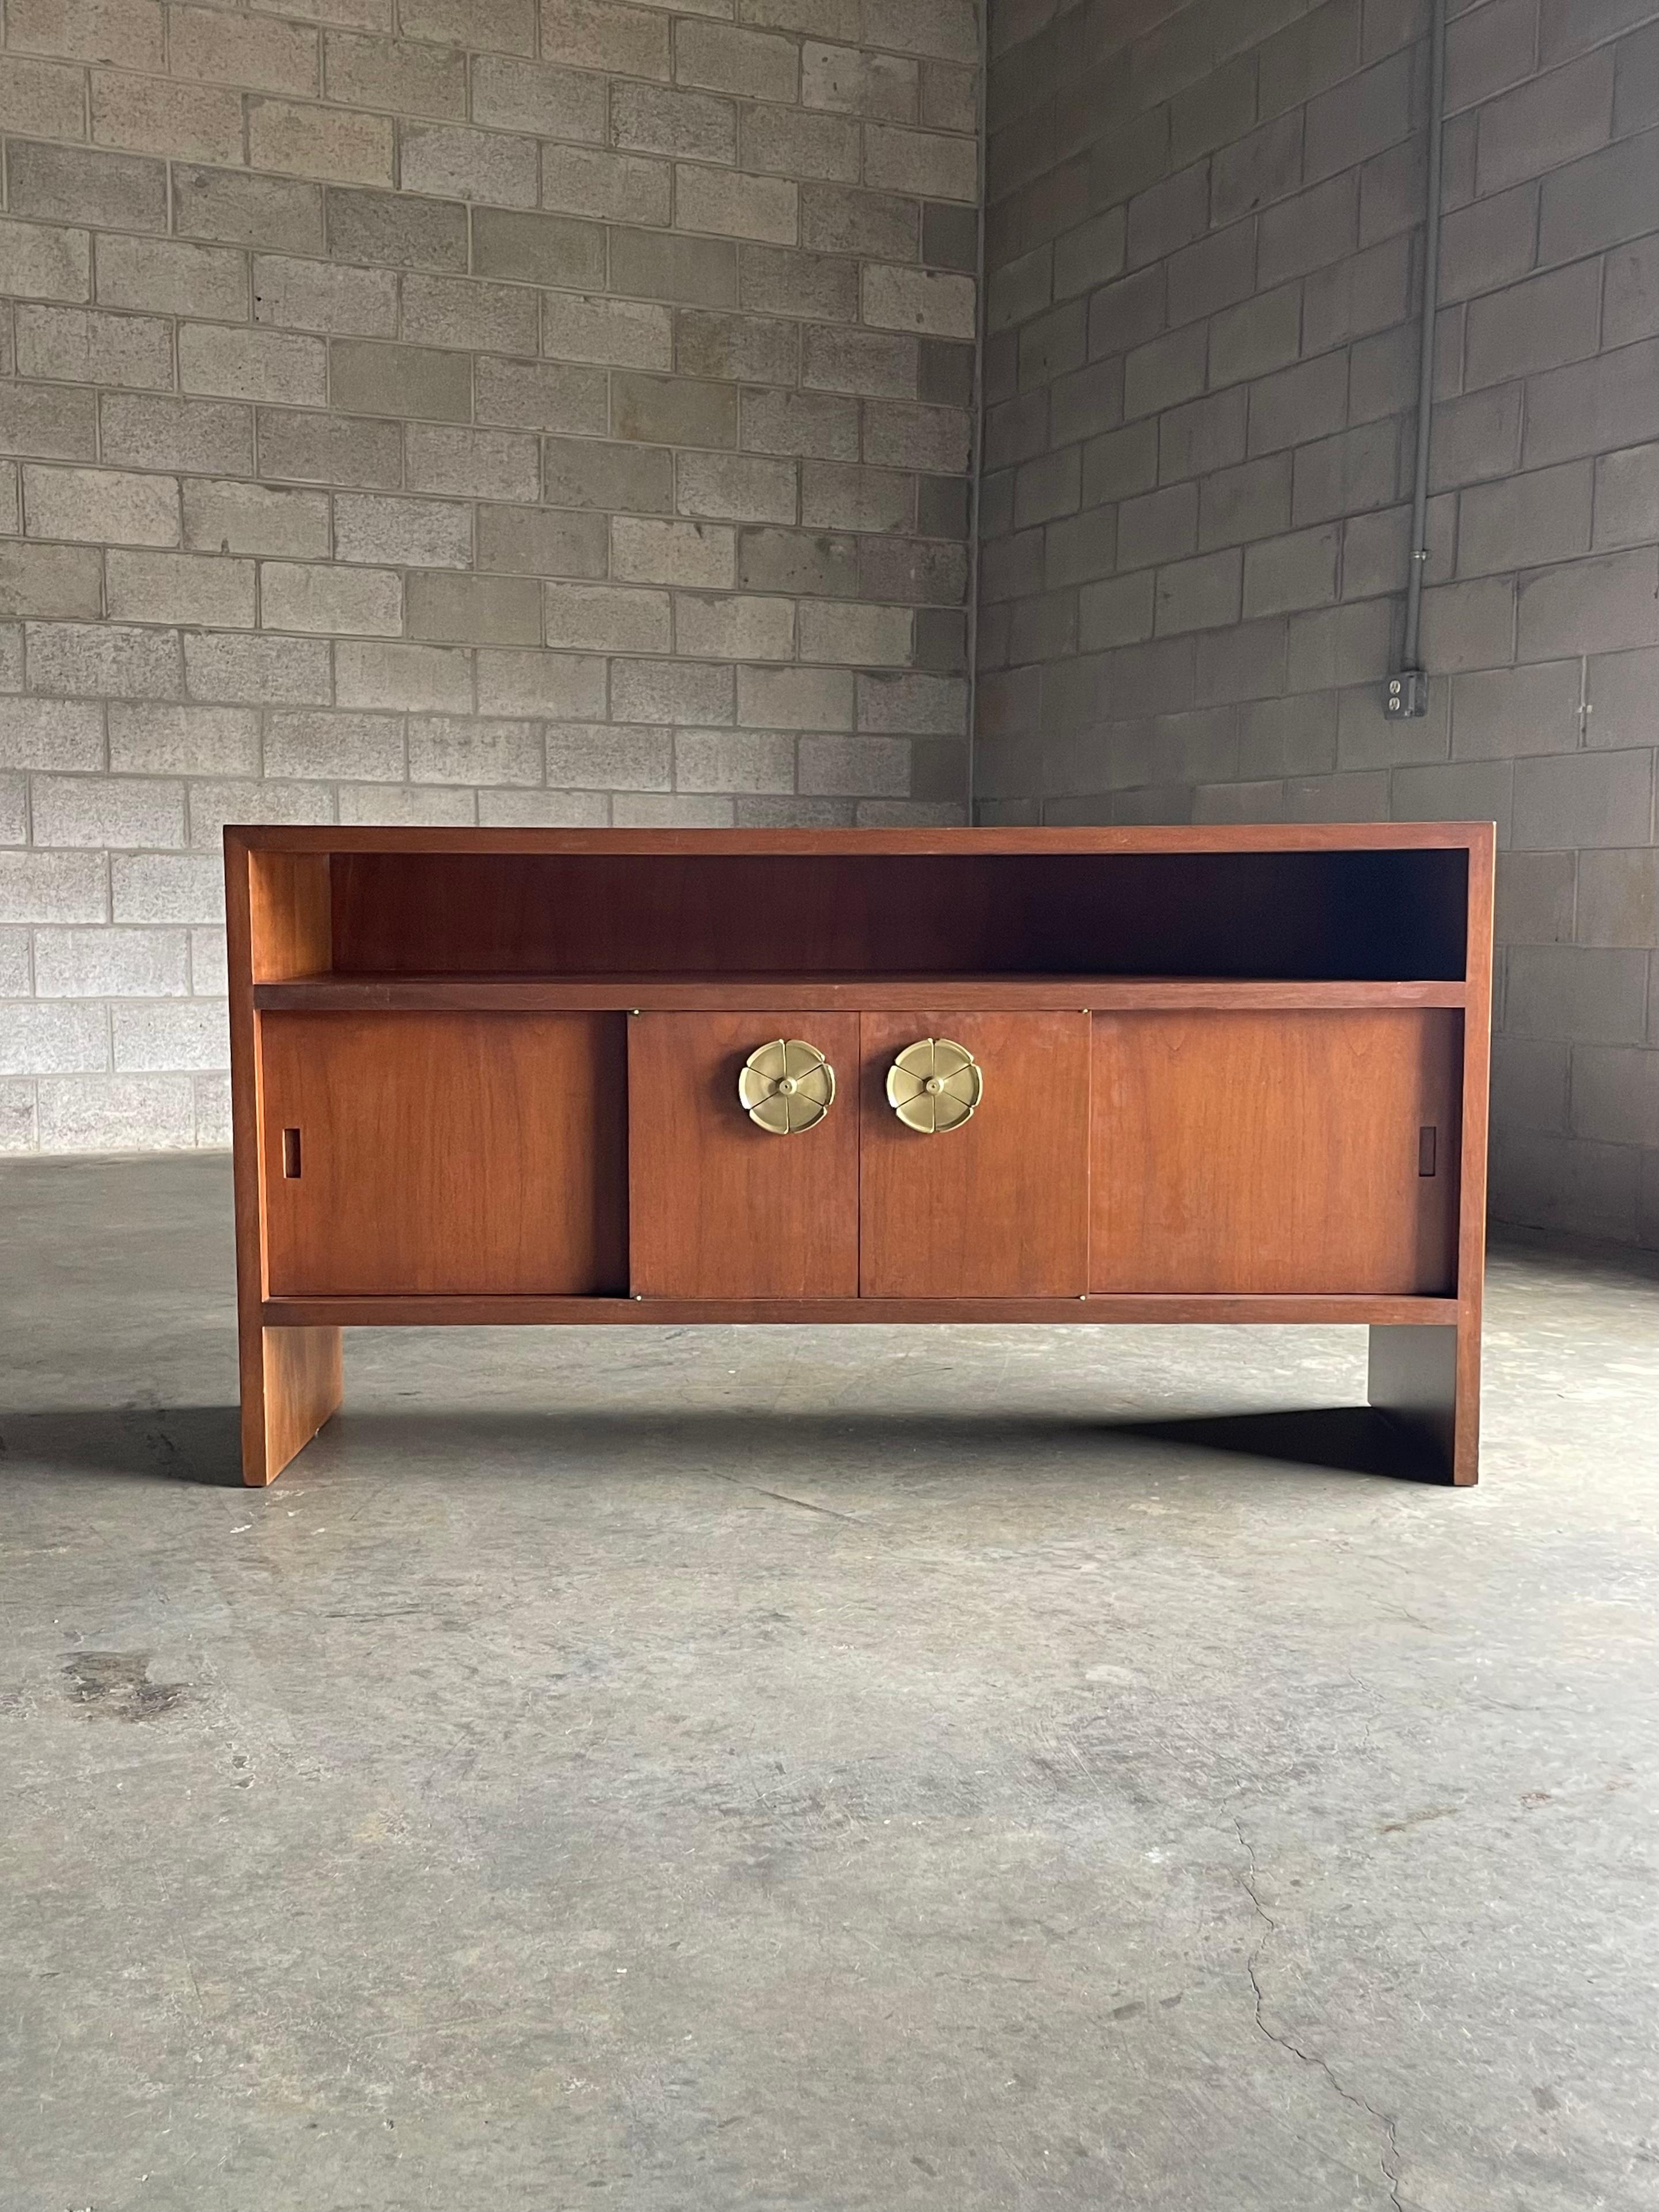 Rare sideboard by T.H. Robsjohn -Gibbings for Saridis of Athens. This piece is completely unique to the market, and one of only a few casegoods available for sale from this line. It's likely to never see another. 

Open shelf sits above sliding